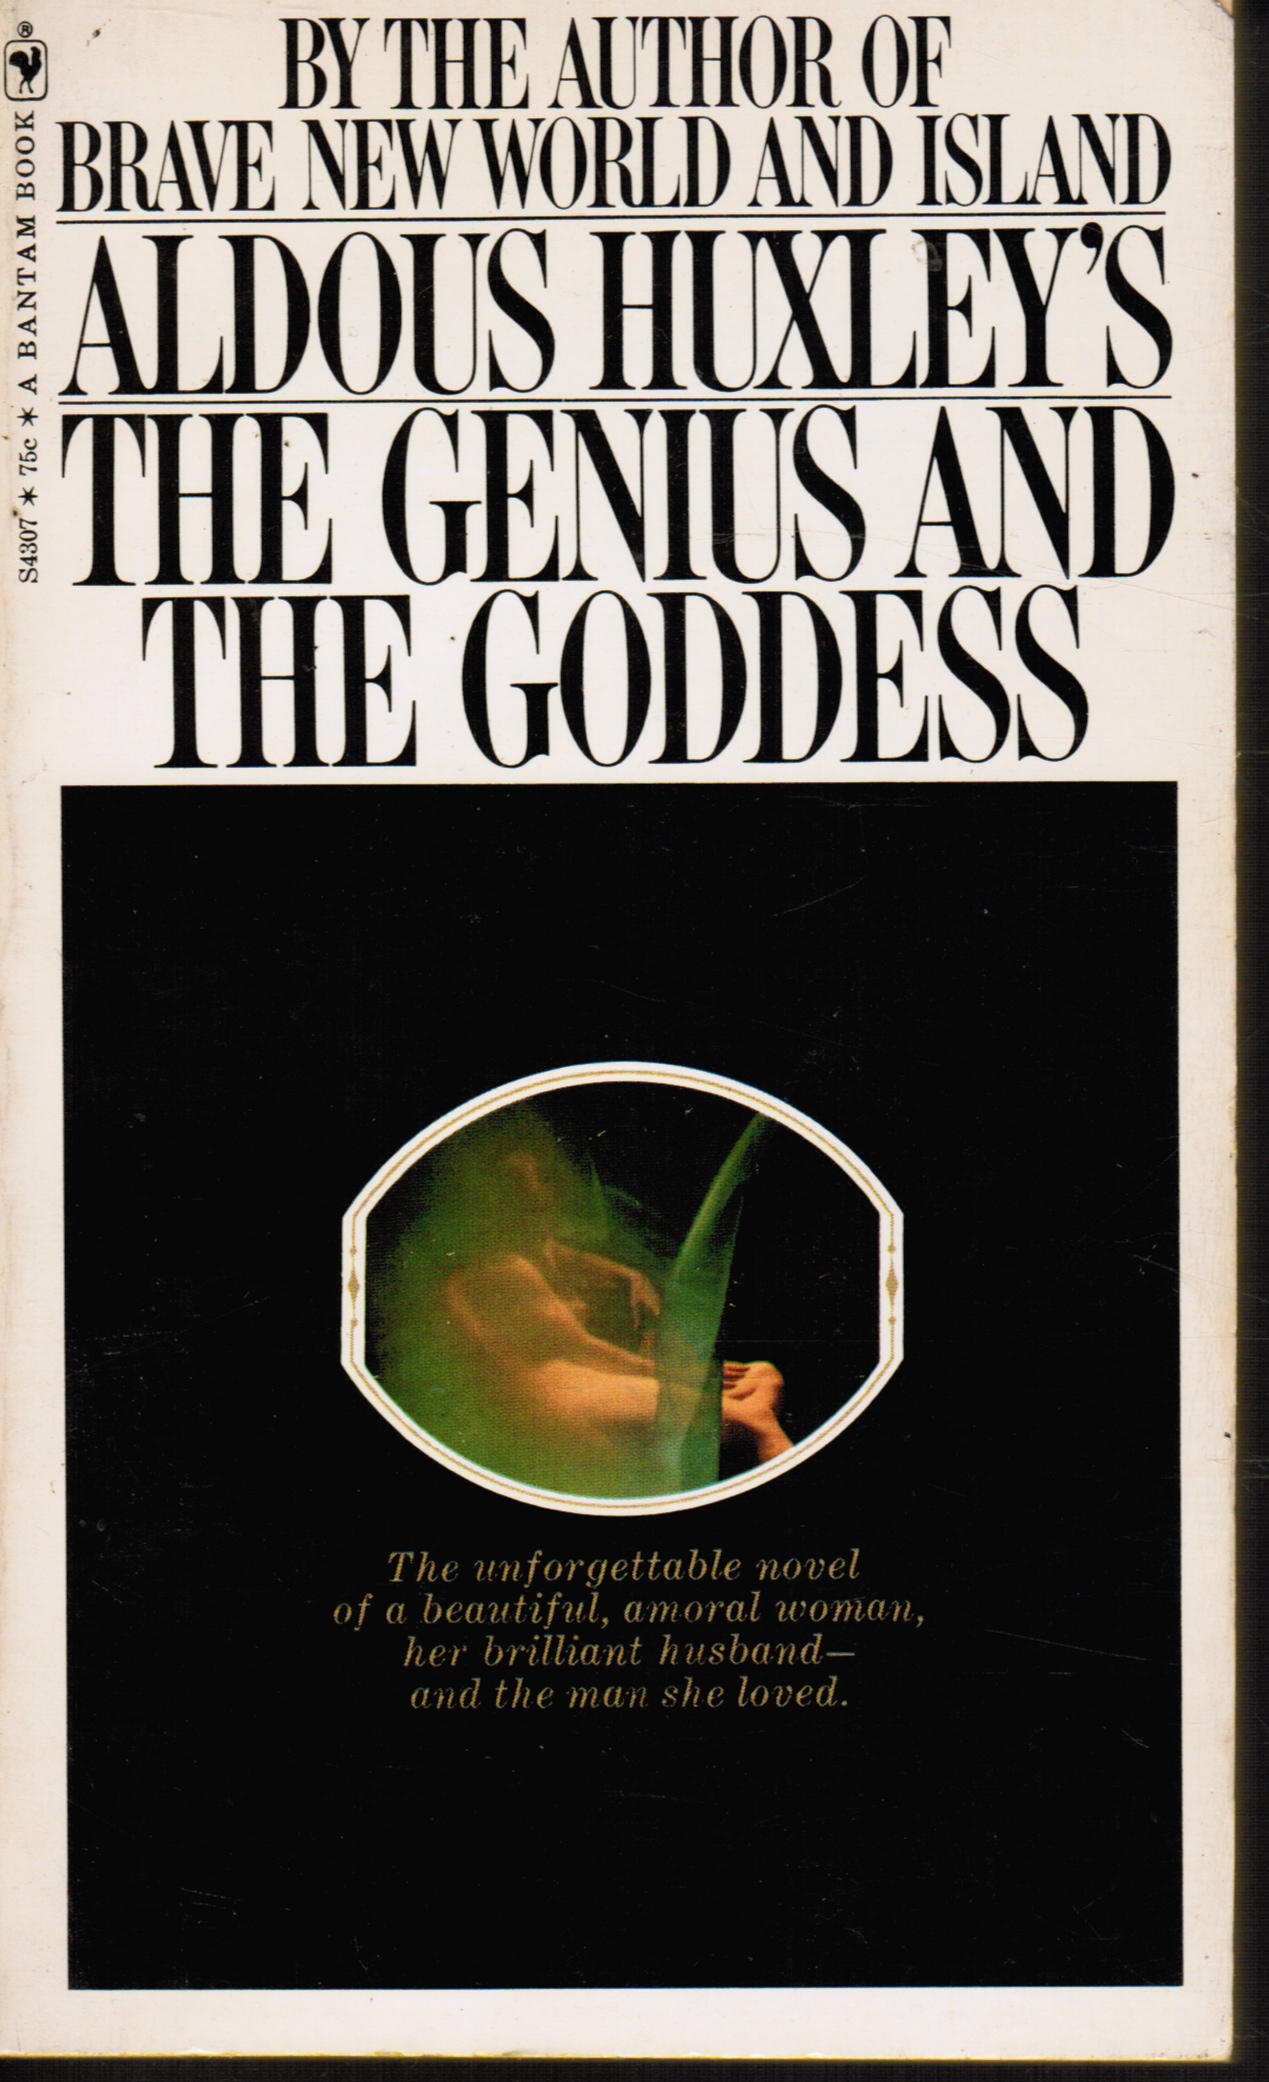 HUXLEY, ALDOUS - The Genius and the Goddess